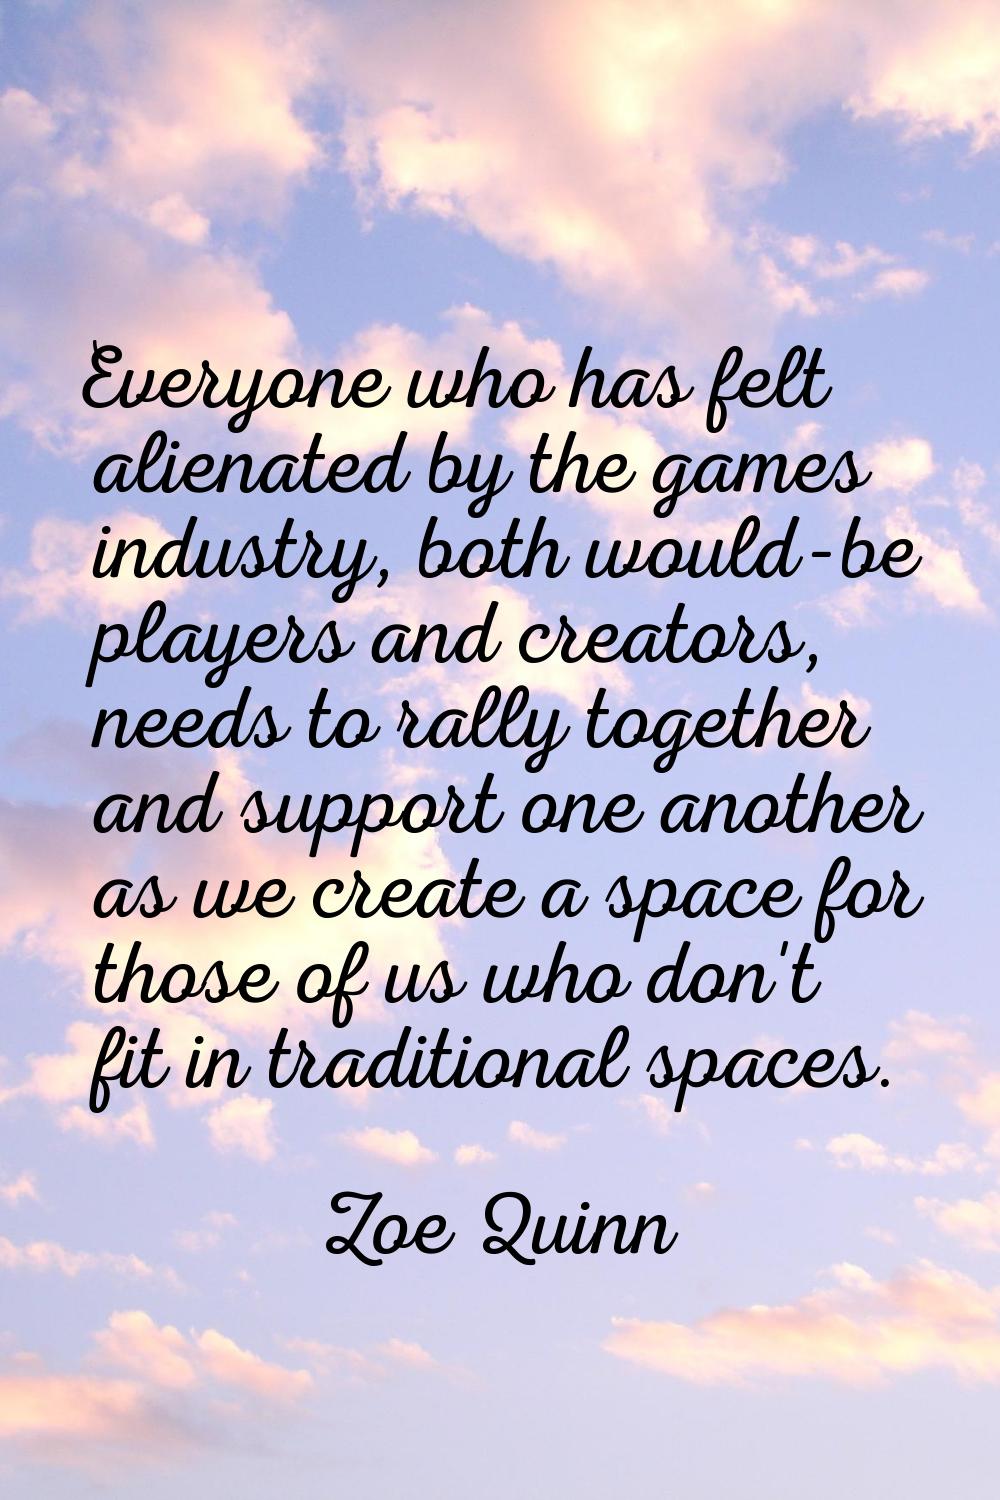 Everyone who has felt alienated by the games industry, both would-be players and creators, needs to